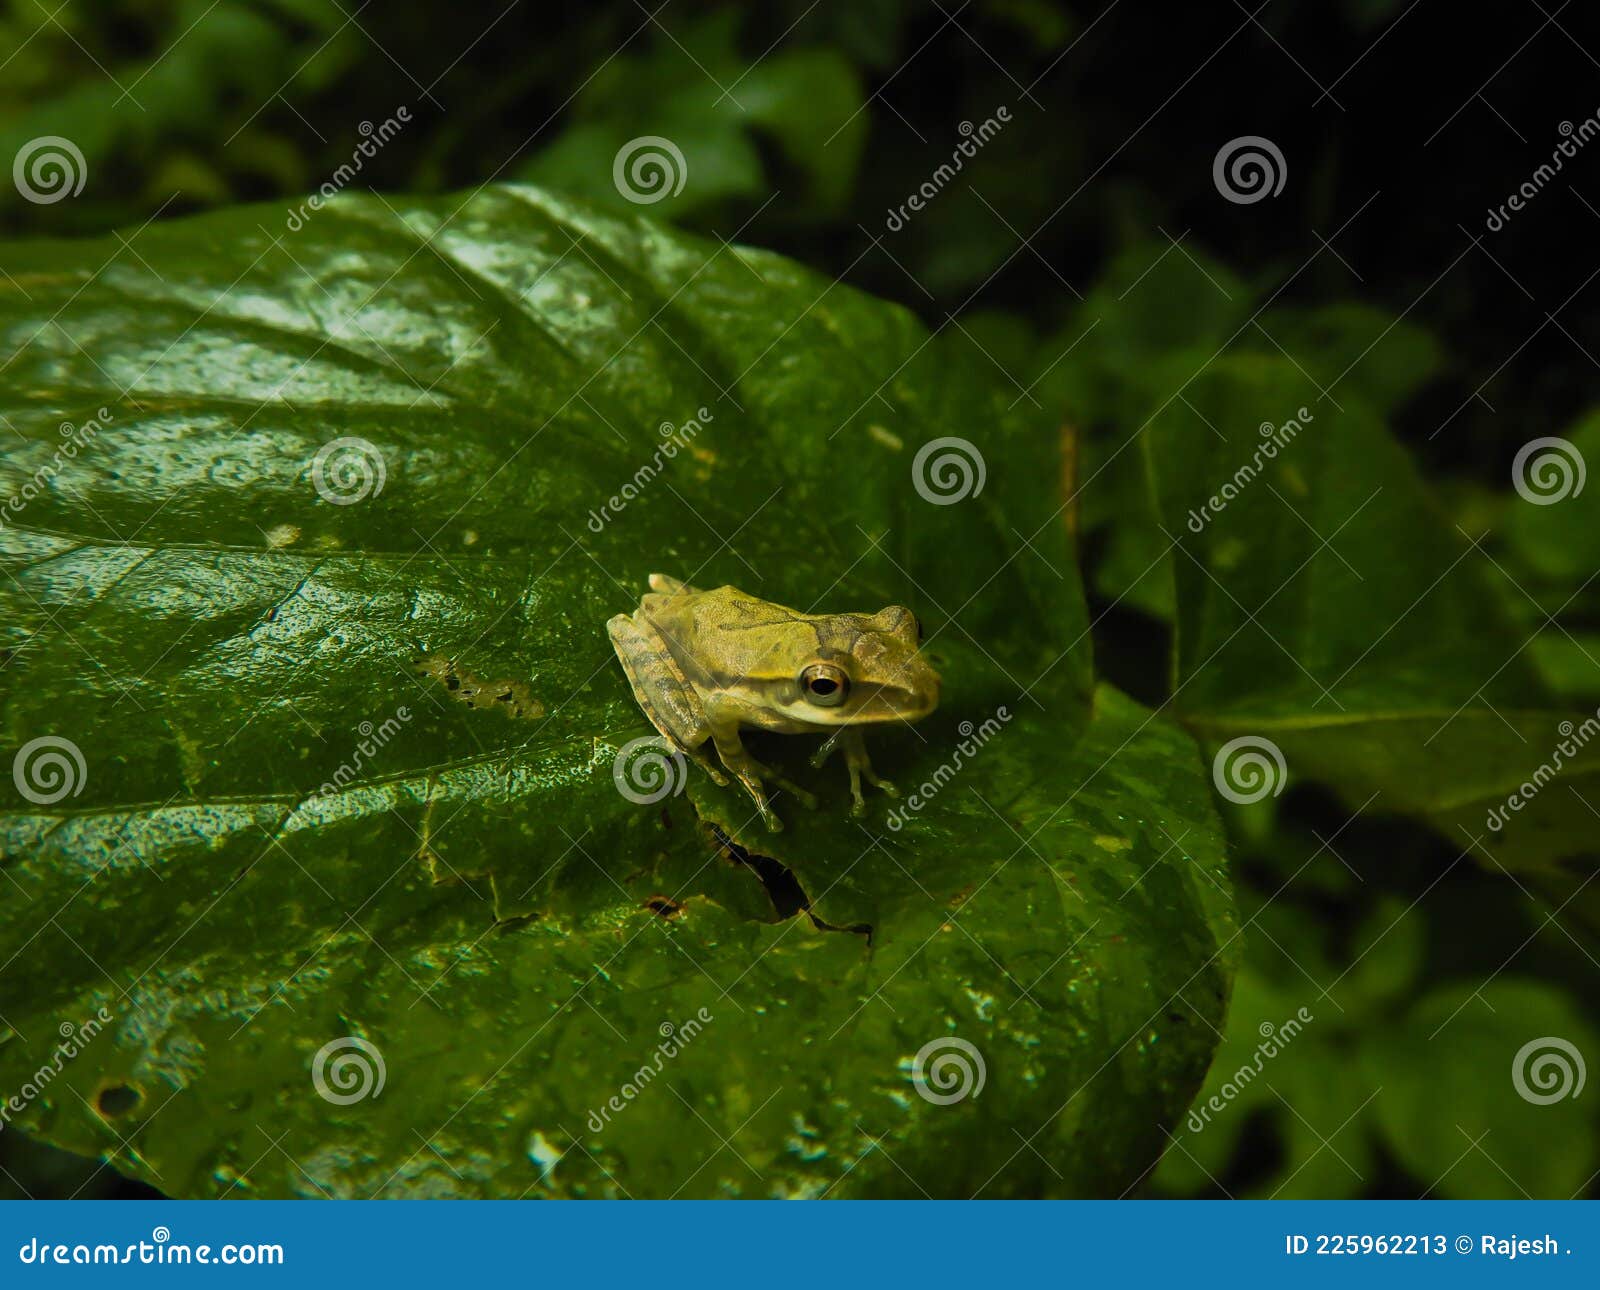 polypedates maculatus, also kown us indian tree frog, tree frog on a leaf